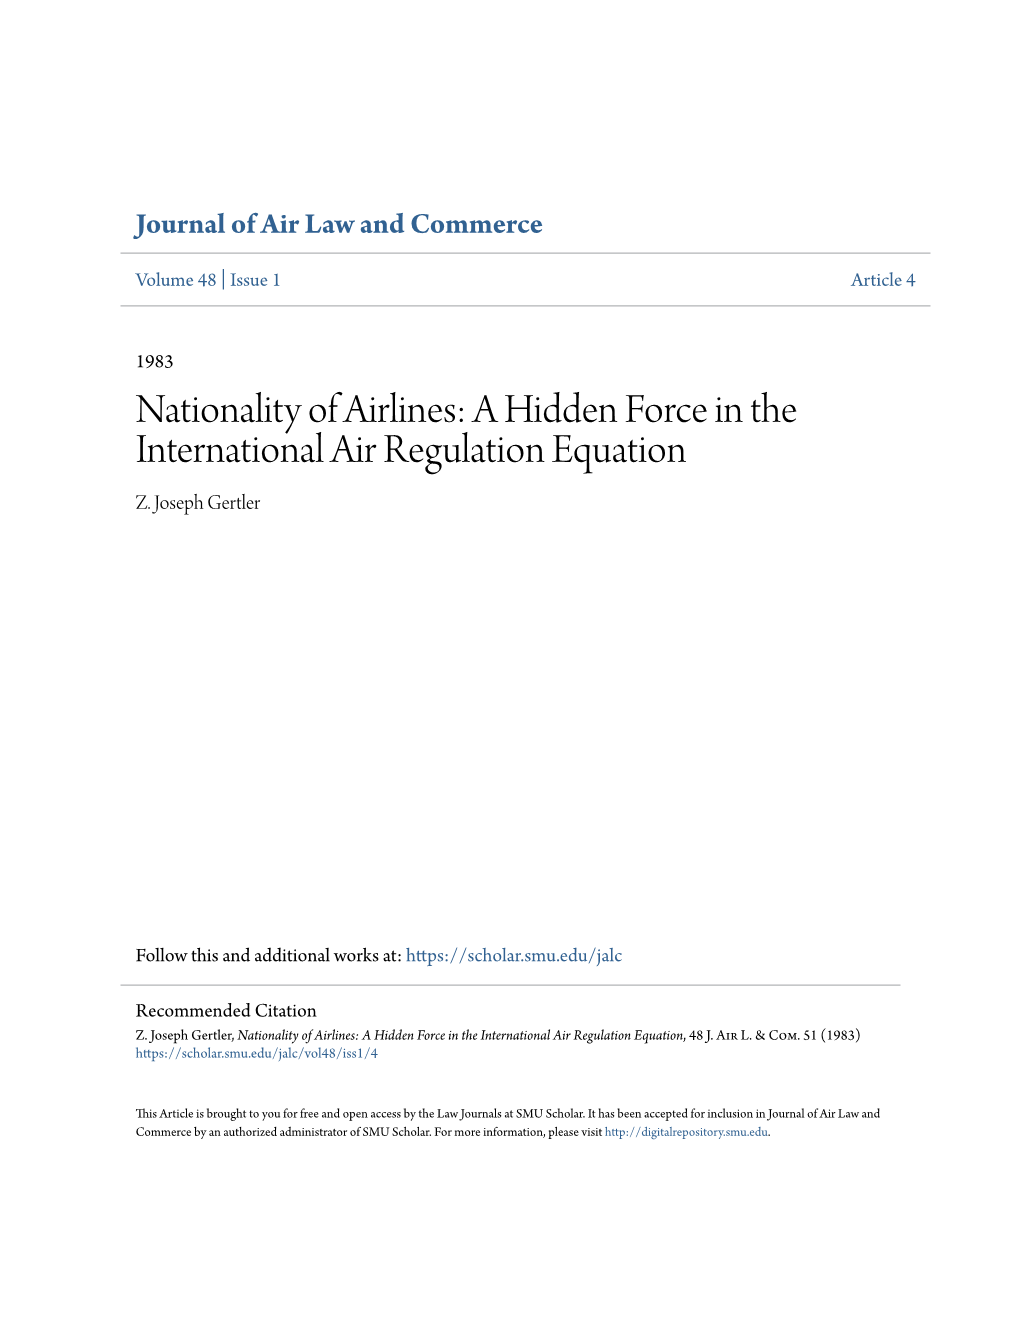 Nationality of Airlines: a Hidden Force in the International Air Regulation Equation Z